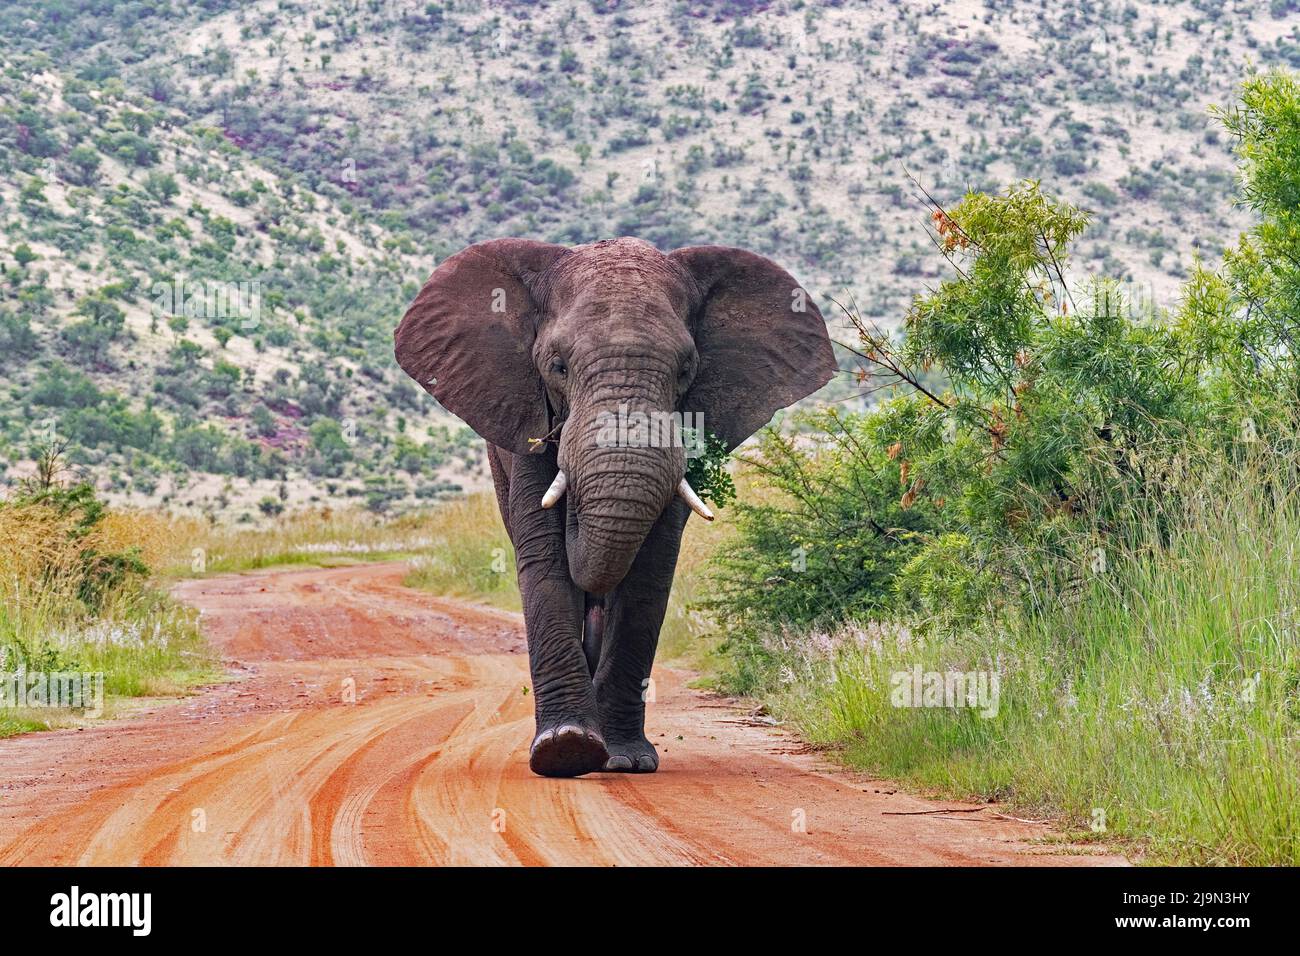 African bush elephant (Loxodonta africana) walking on red dirt road in the Pilanesberg National Park, North West Province, South Africa Stock Photo